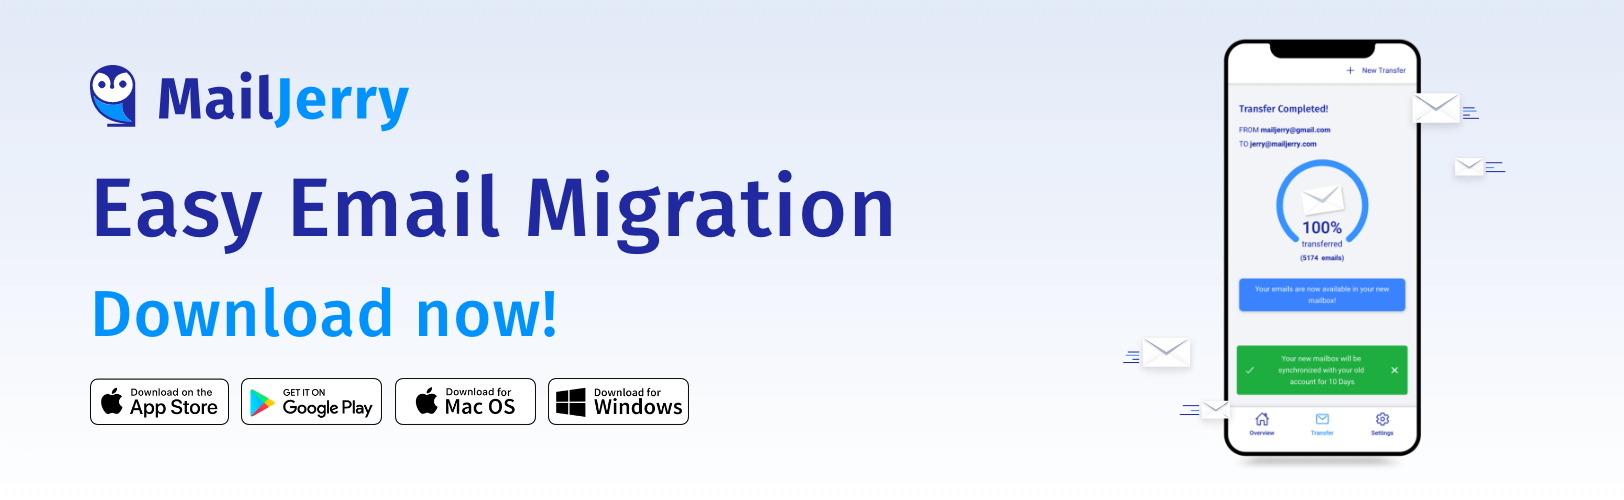 Download email migration tool for free